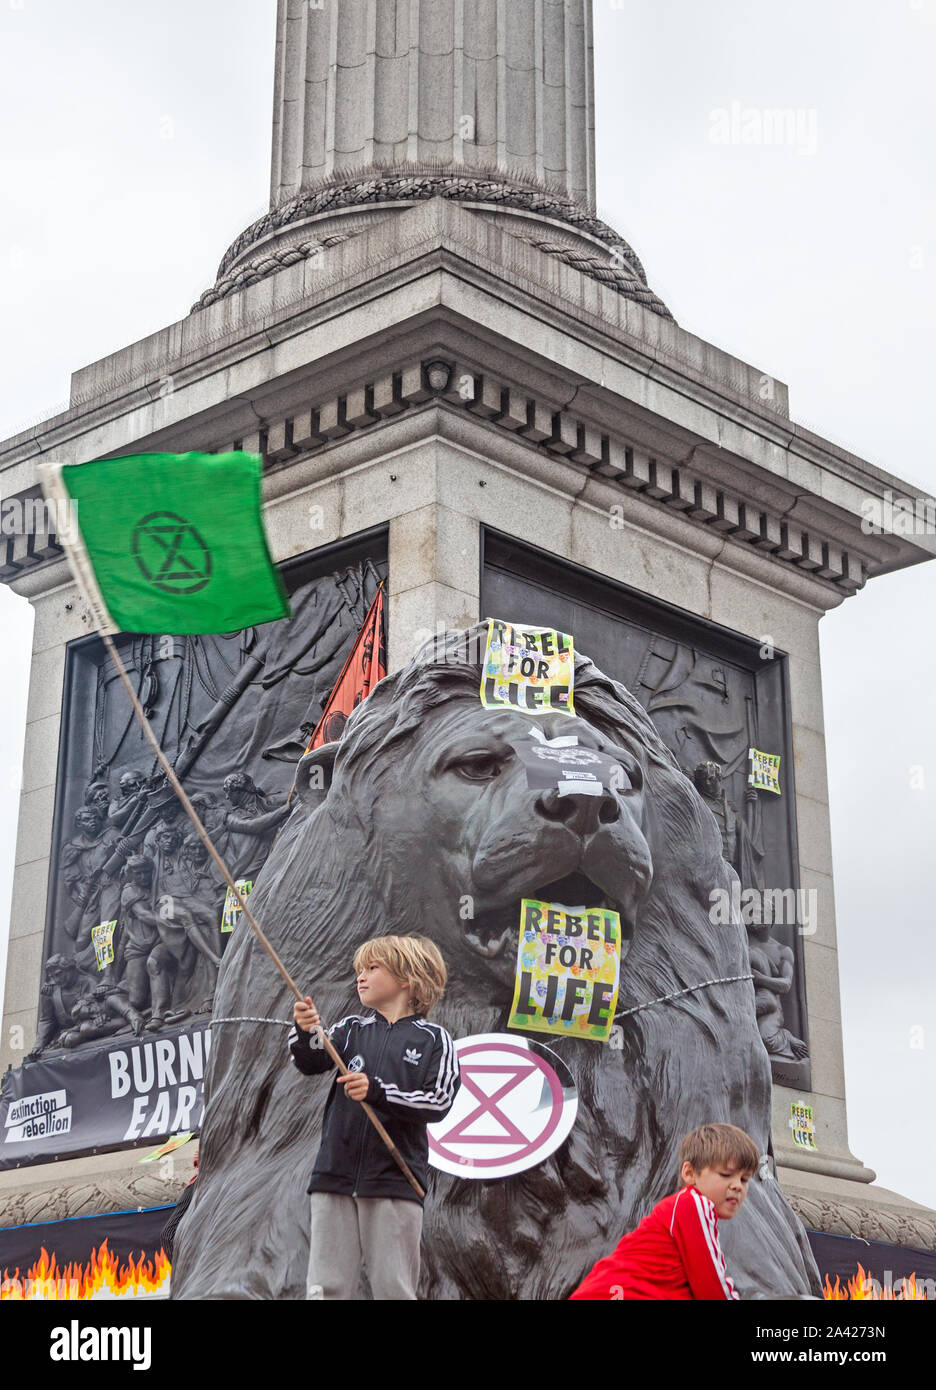 October 8th, 2019. The first day of Extinction Rebellion's occupation of Trafalgar Square. Young demonstrators  on a  lion plinth waving XR flag. Stock Photo